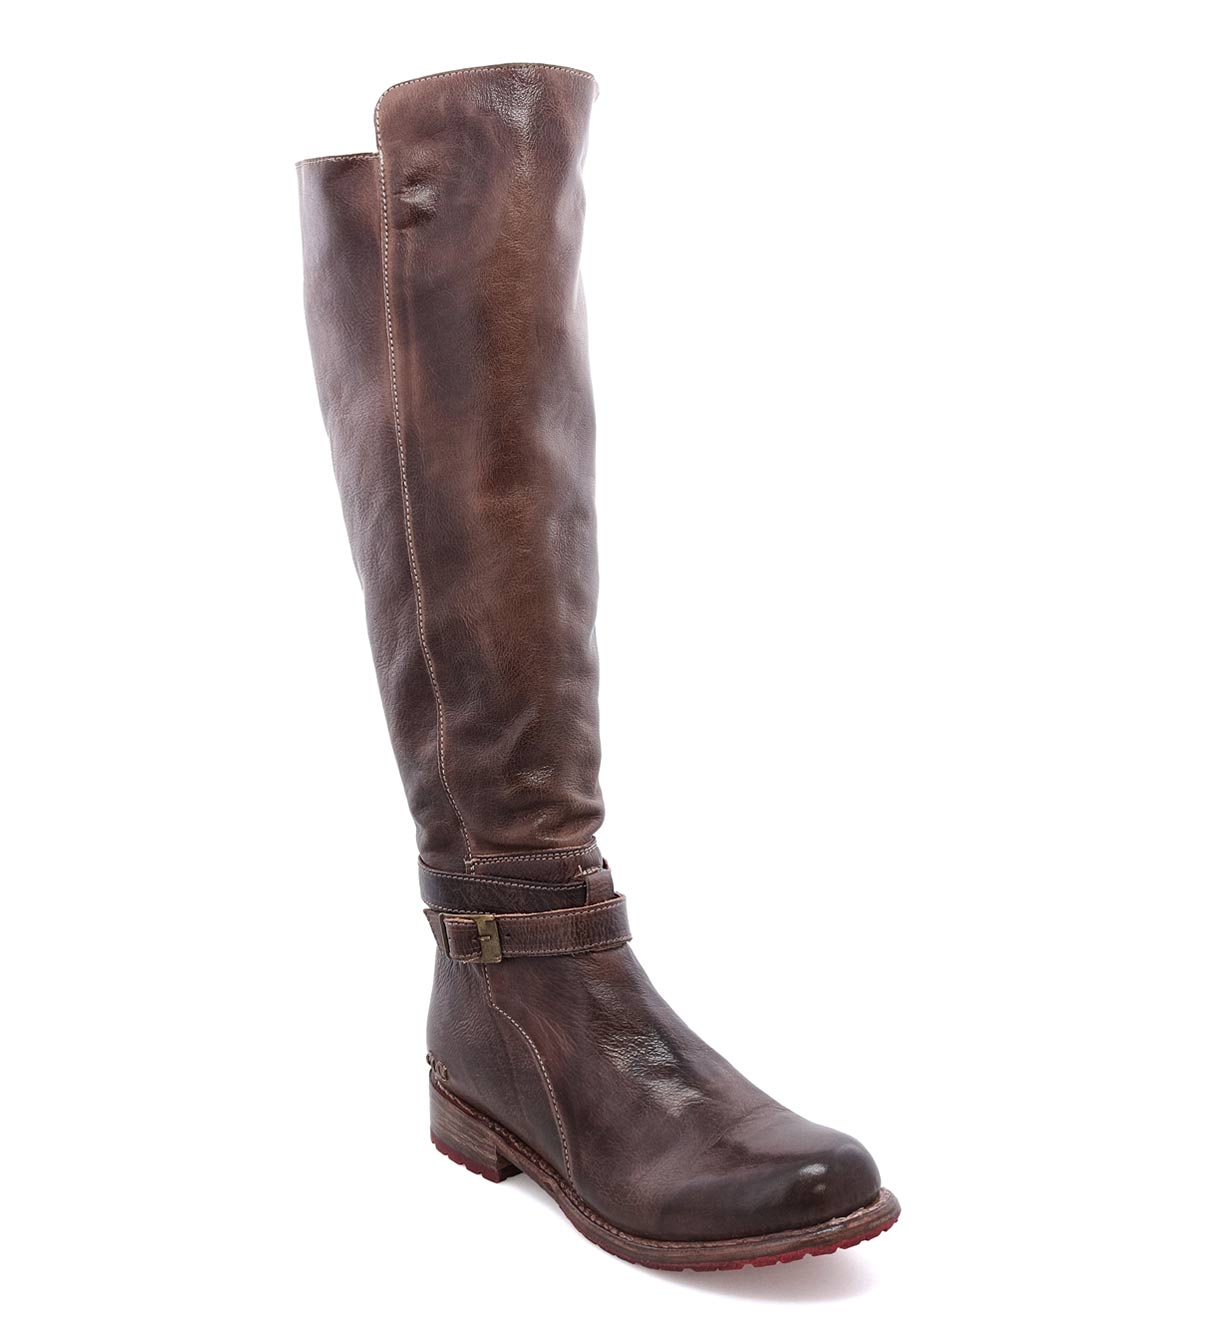 A women's Bed Stu Bristol brown leather boot with buckles.